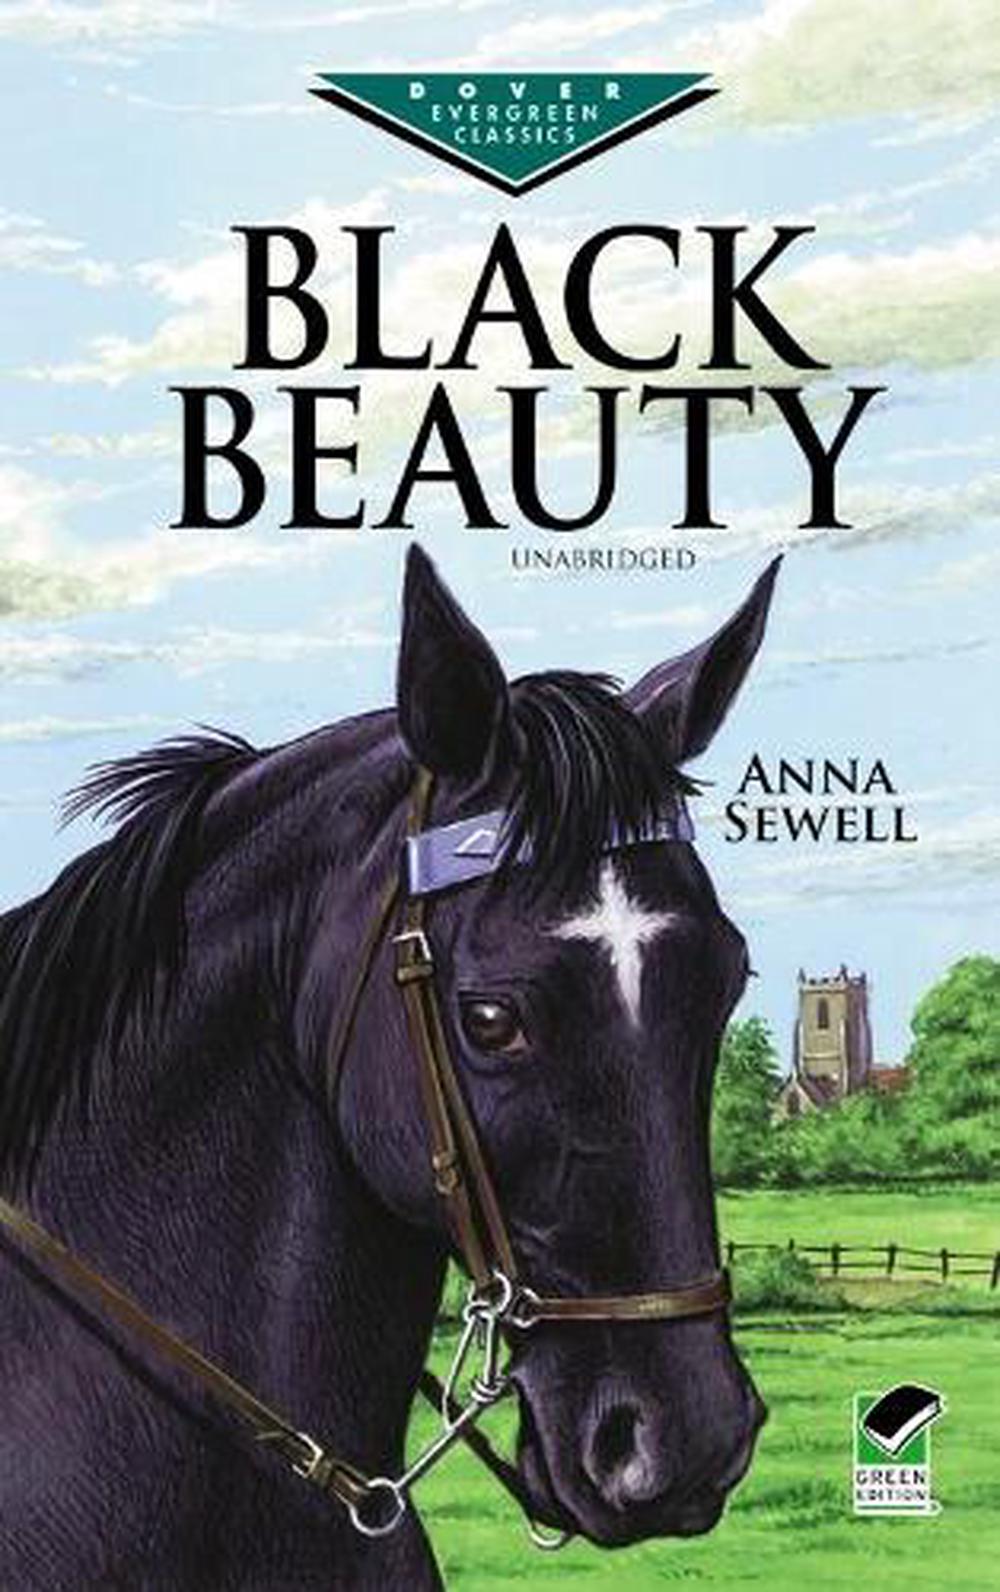 Black Beauty By Anna Sewell Paperback 9780486407883 Buy Online At